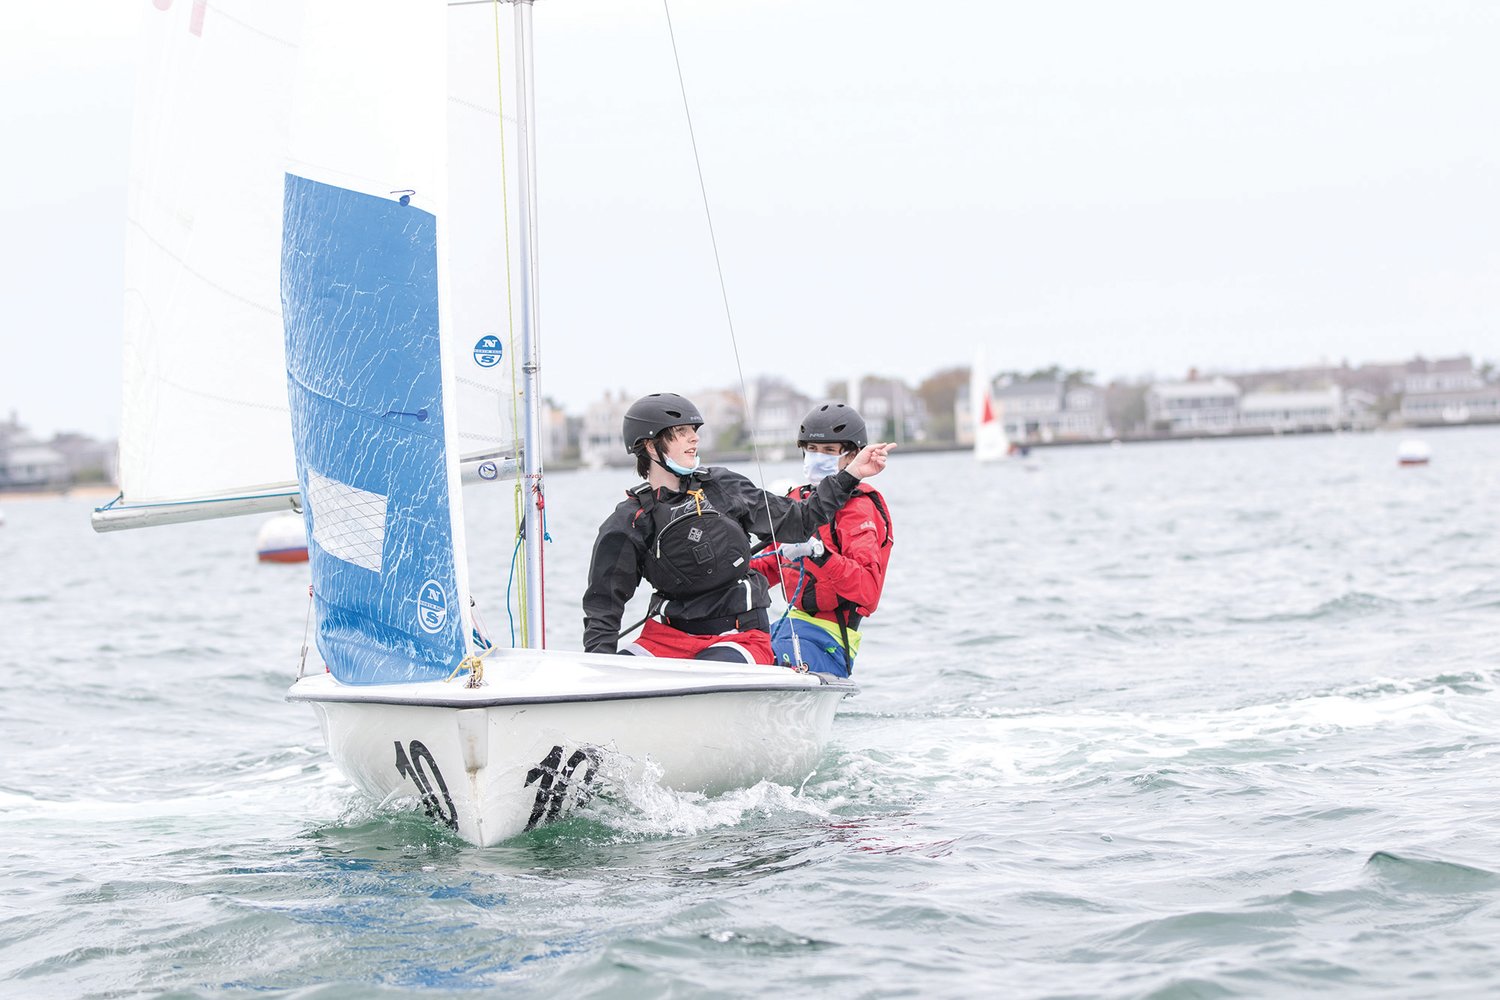 The sailing team came out on top in a regatta against Barnstable this week.